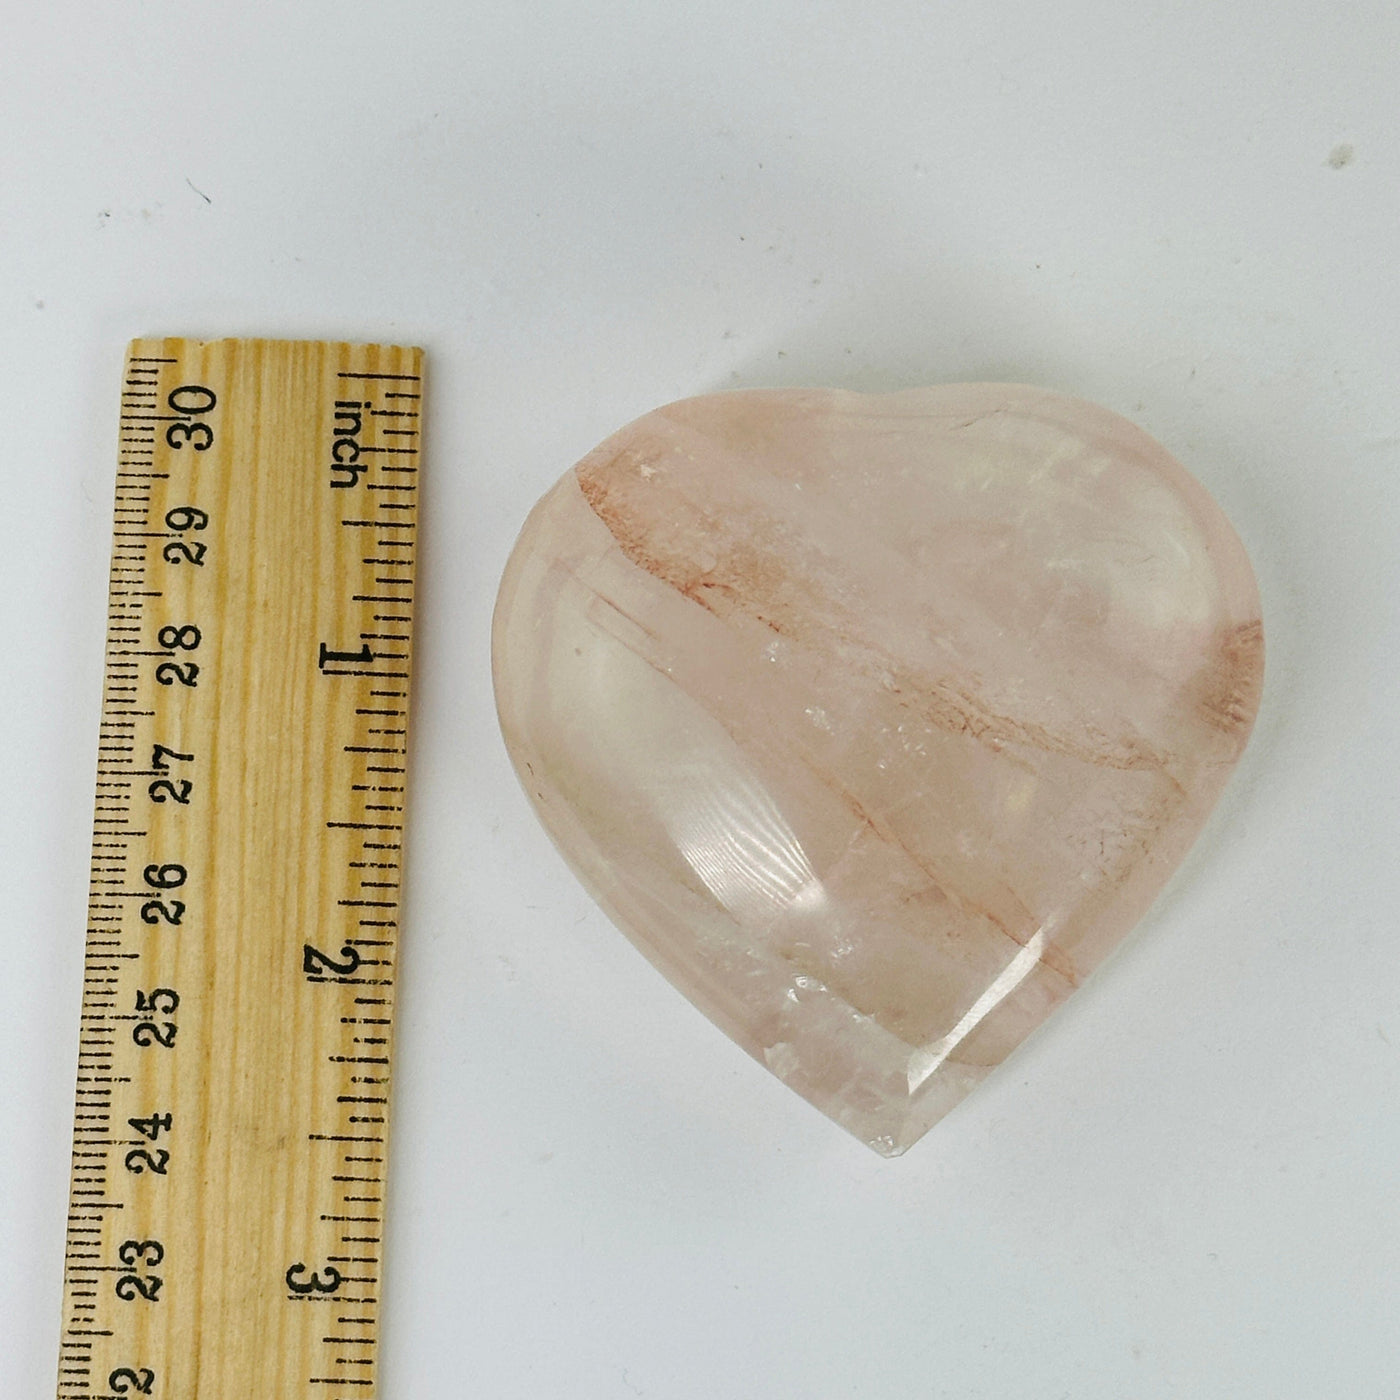 ROSE QUARTZ HEART next to a ruler for size reference